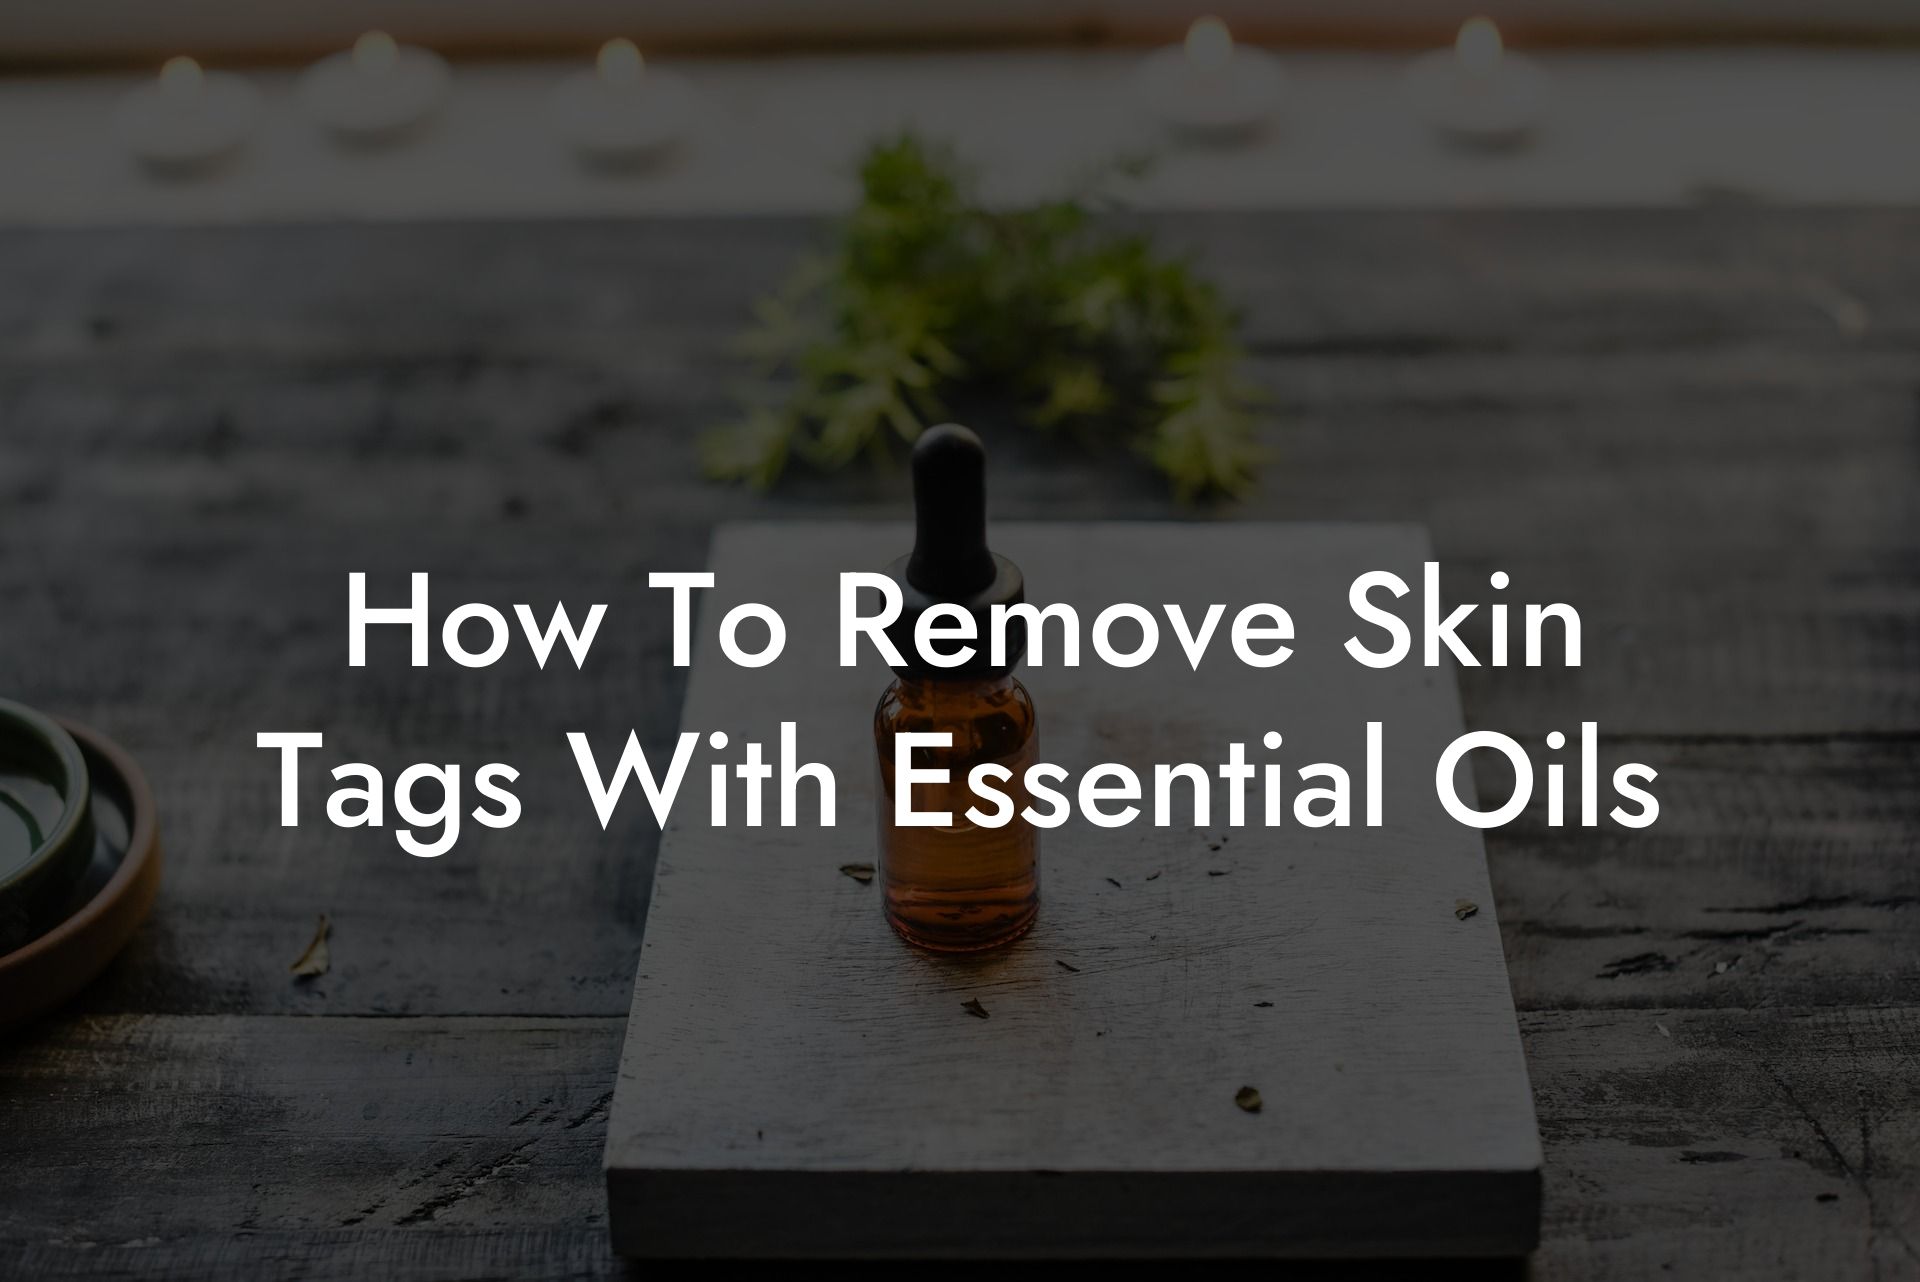 How To Remove Skin Tags With Essential Oils